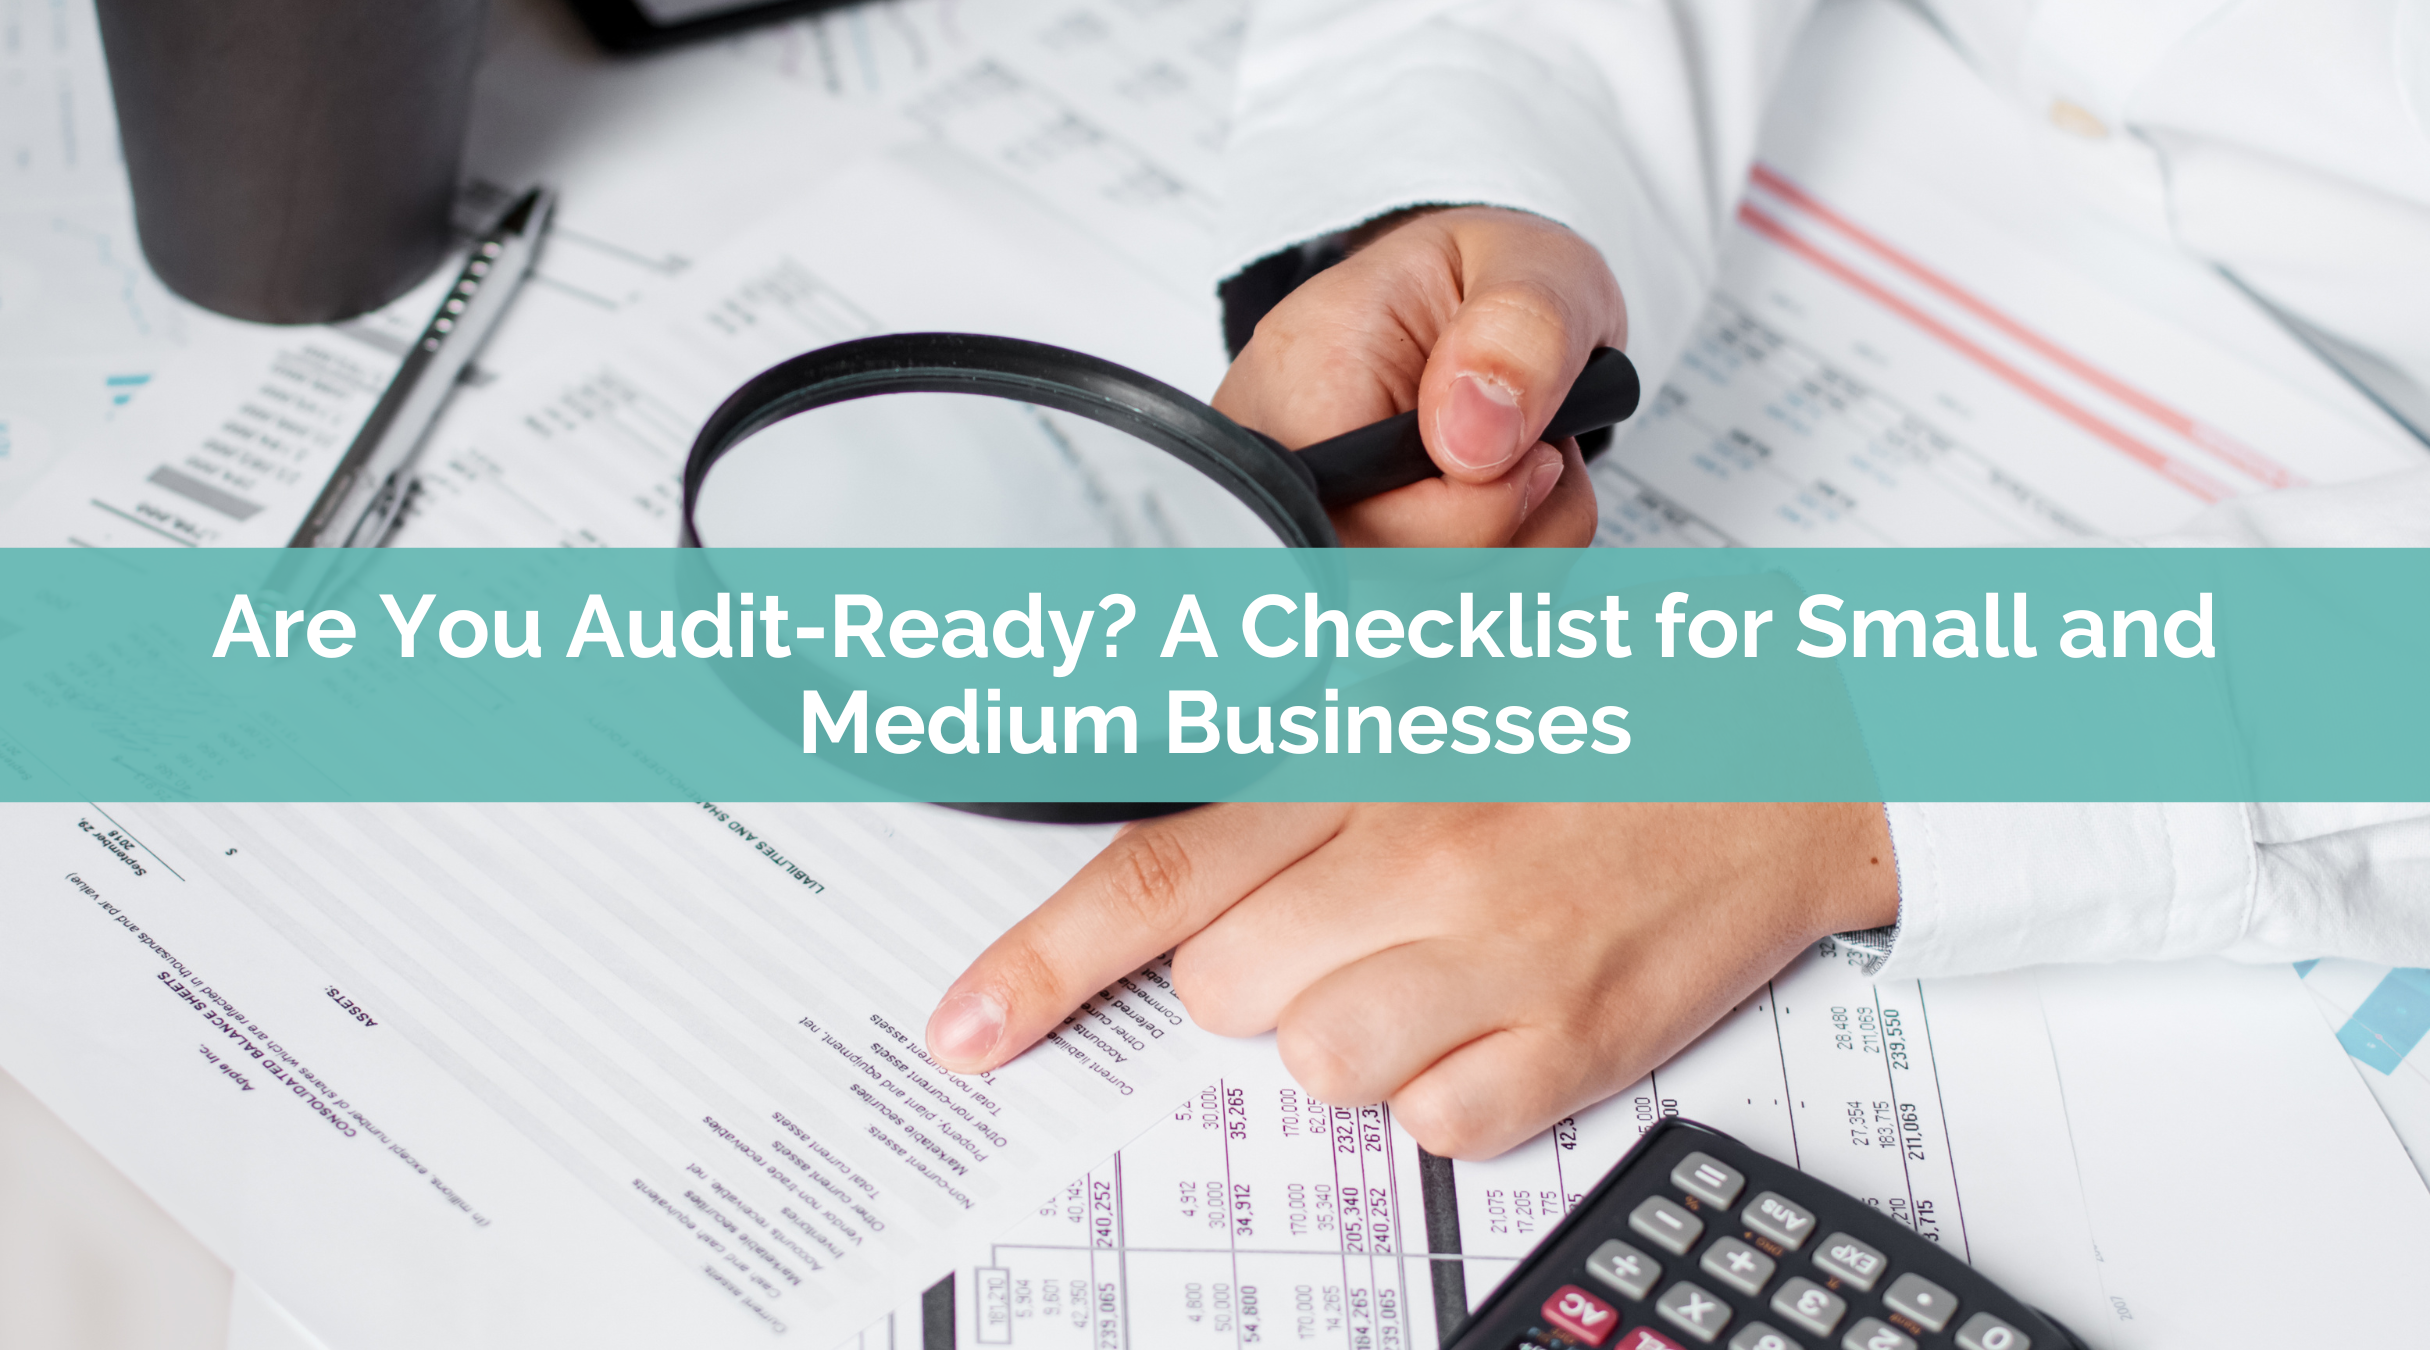 Are You Audit-Ready? A Checklist for Small and Medium Businesses